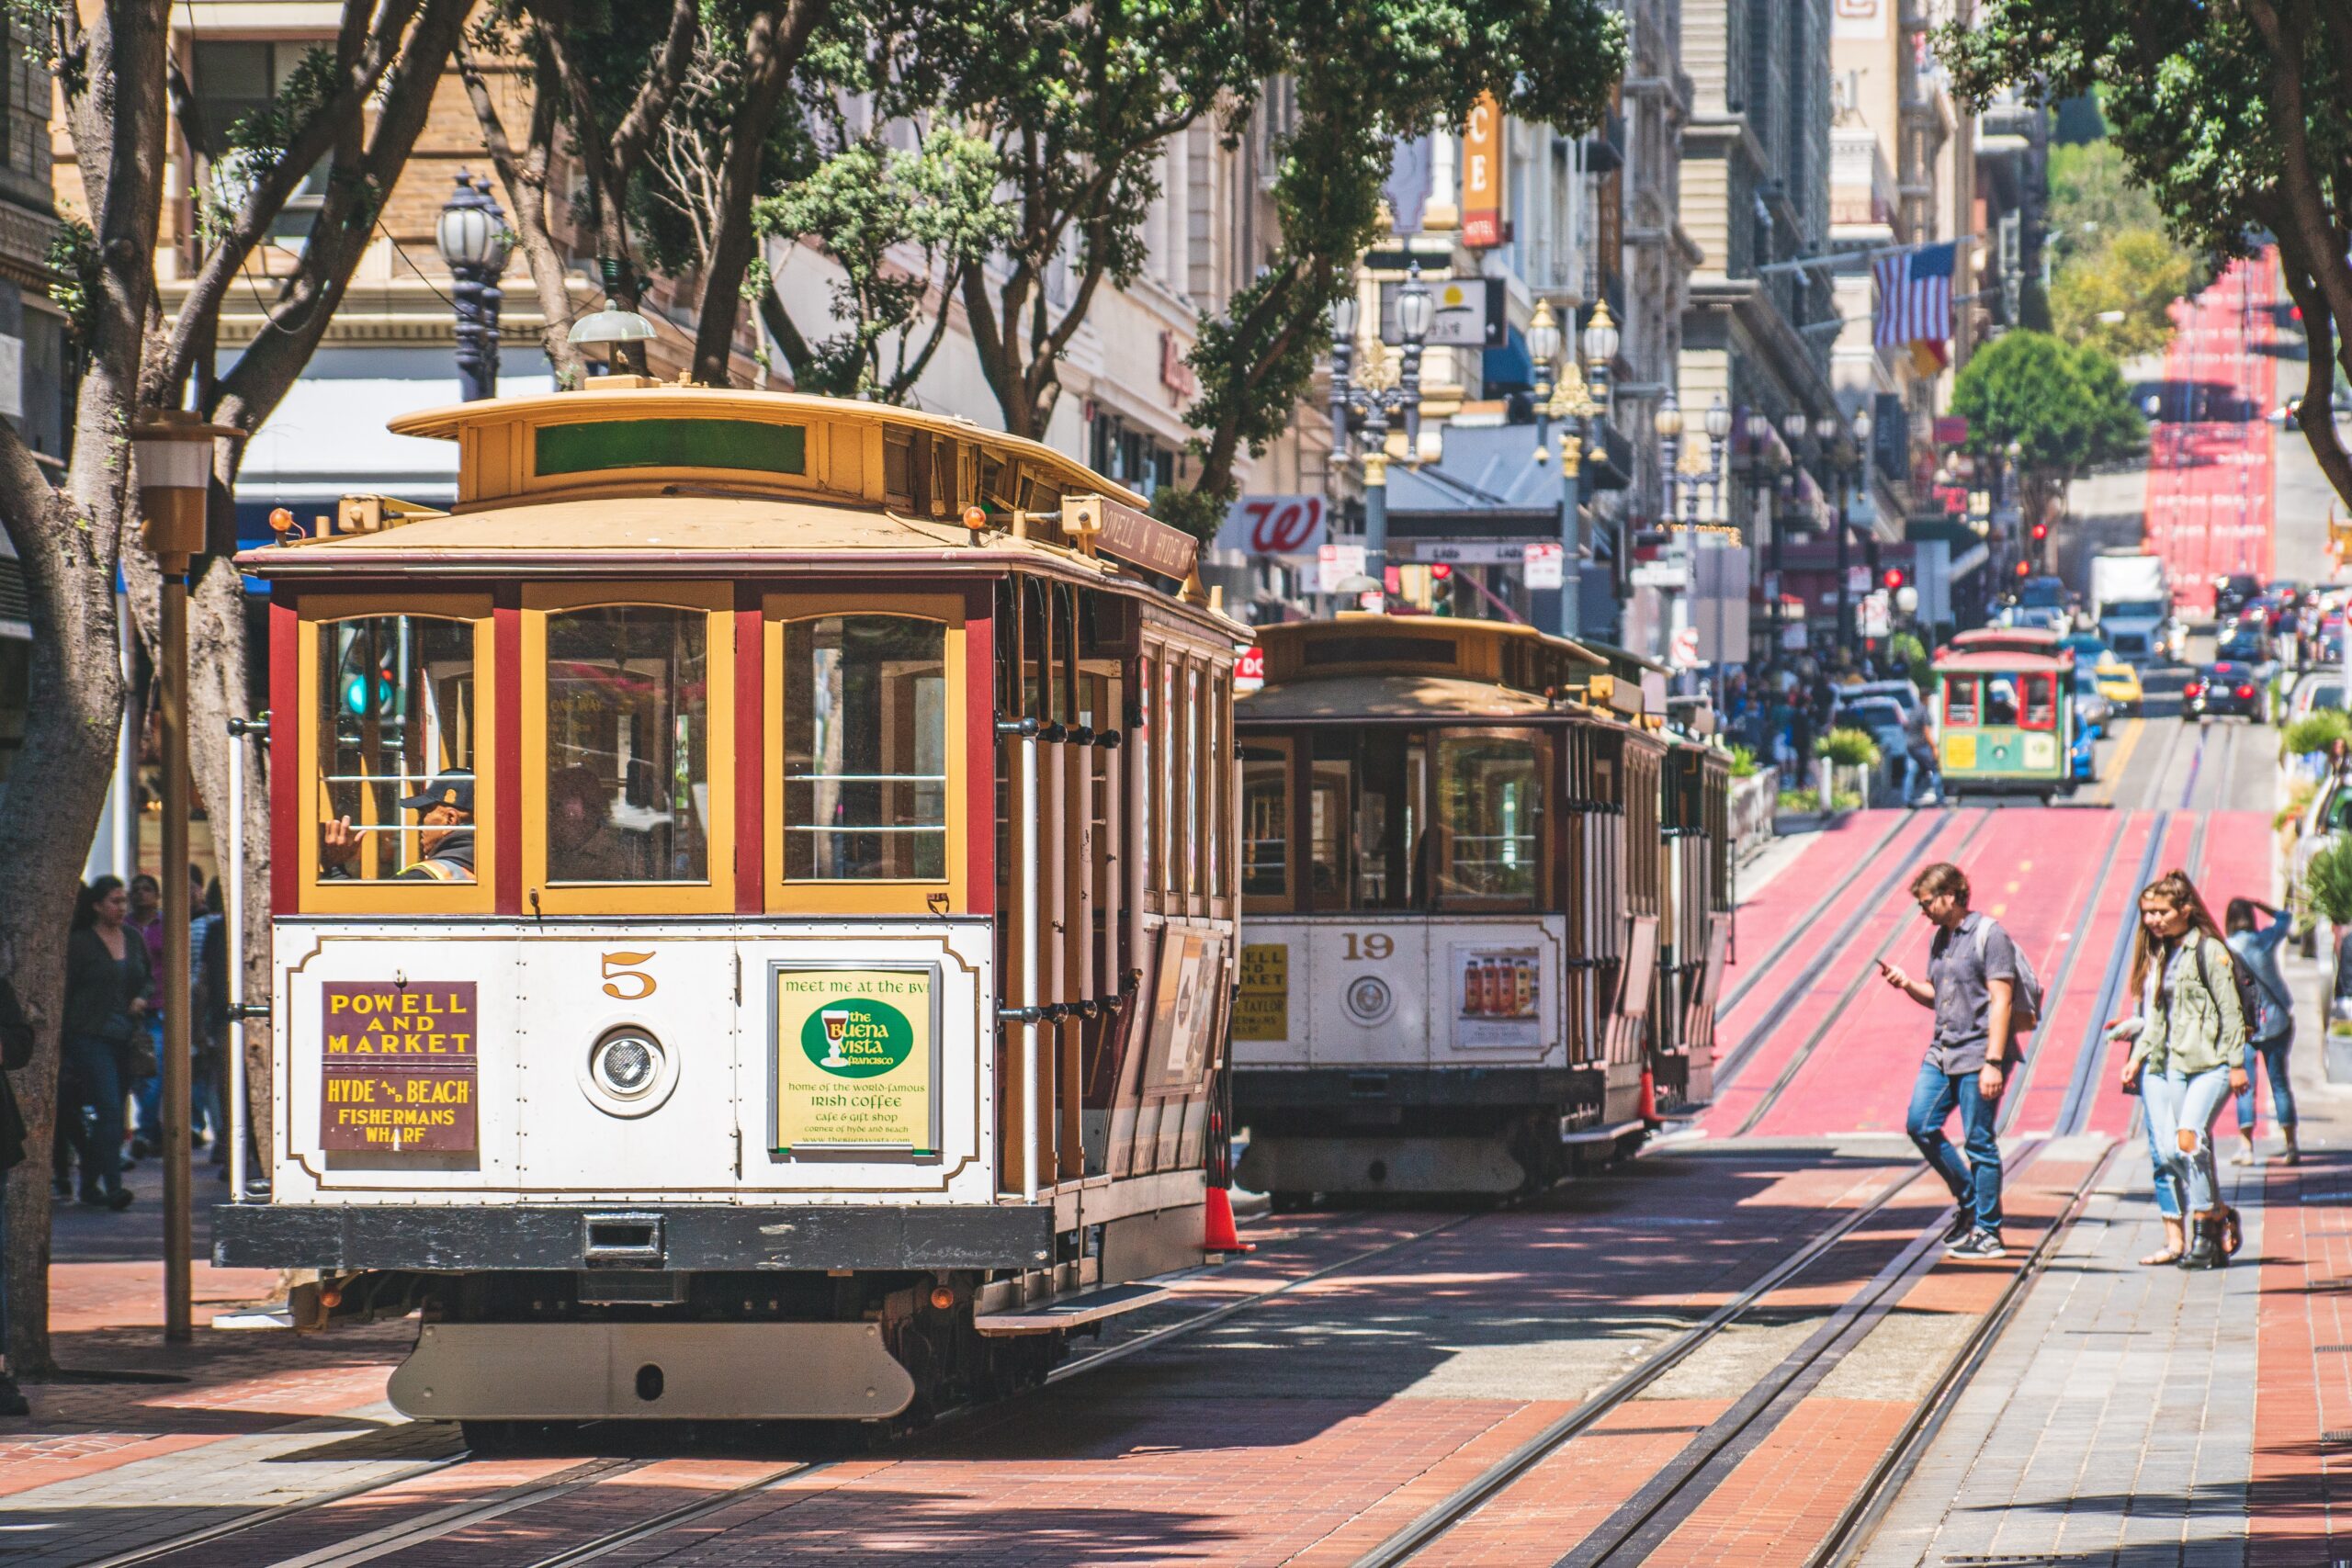 As one of the most expensive cities in the U.S., San Francisco is known for cable cars, architecture and the Golden Gate Bridge. Pictured: A street view of San Francisco, California.